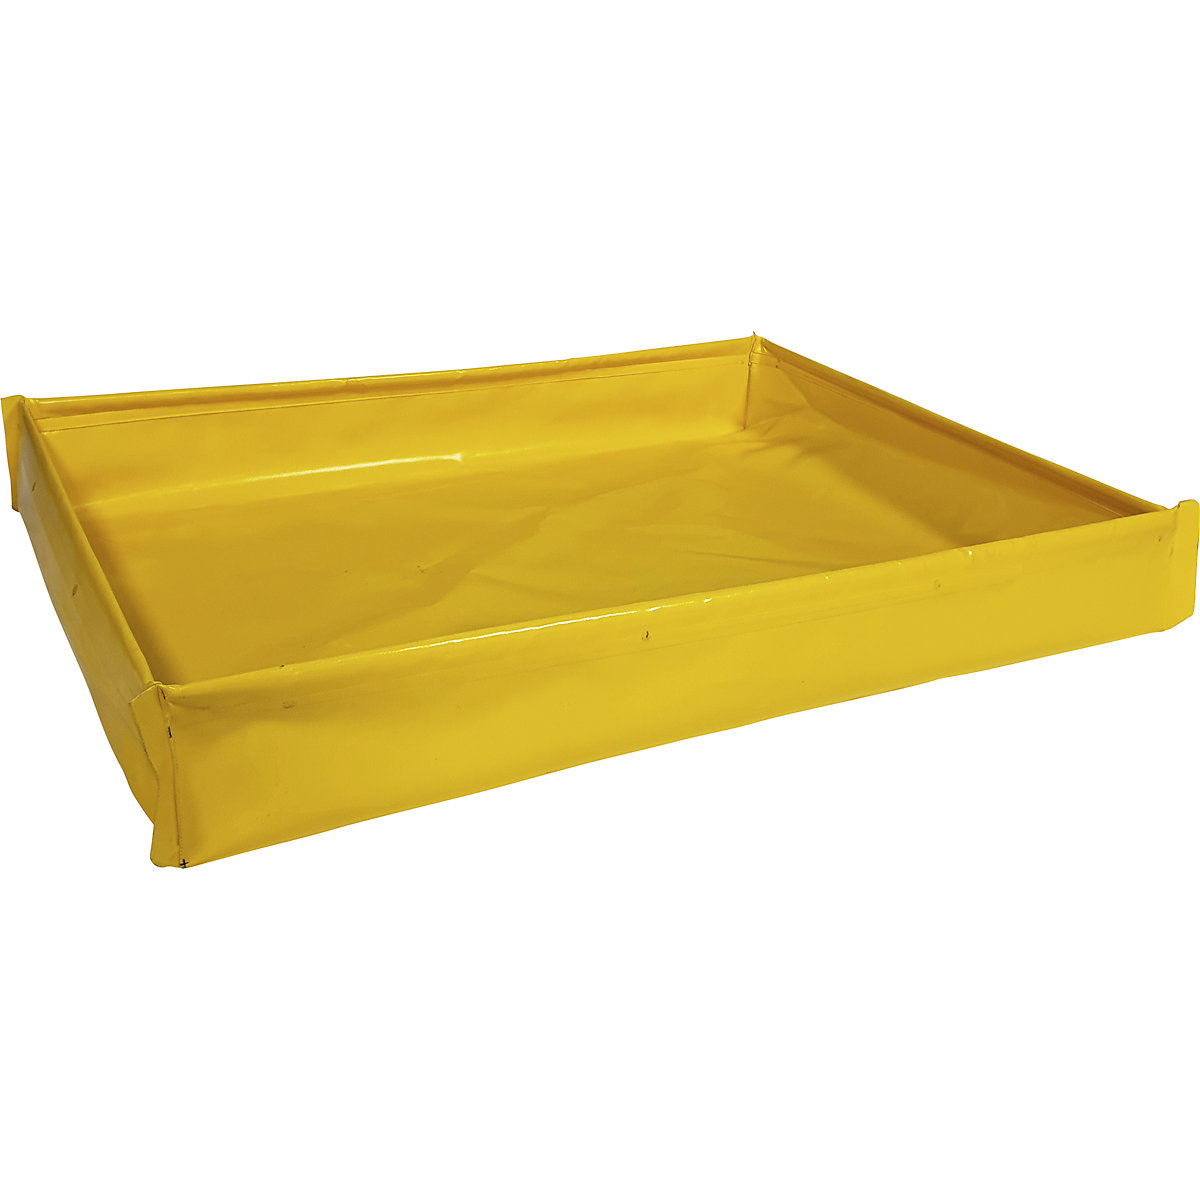 Folding tray small container – eurokraft basic, made of PVC, collection capacity 57 l-5